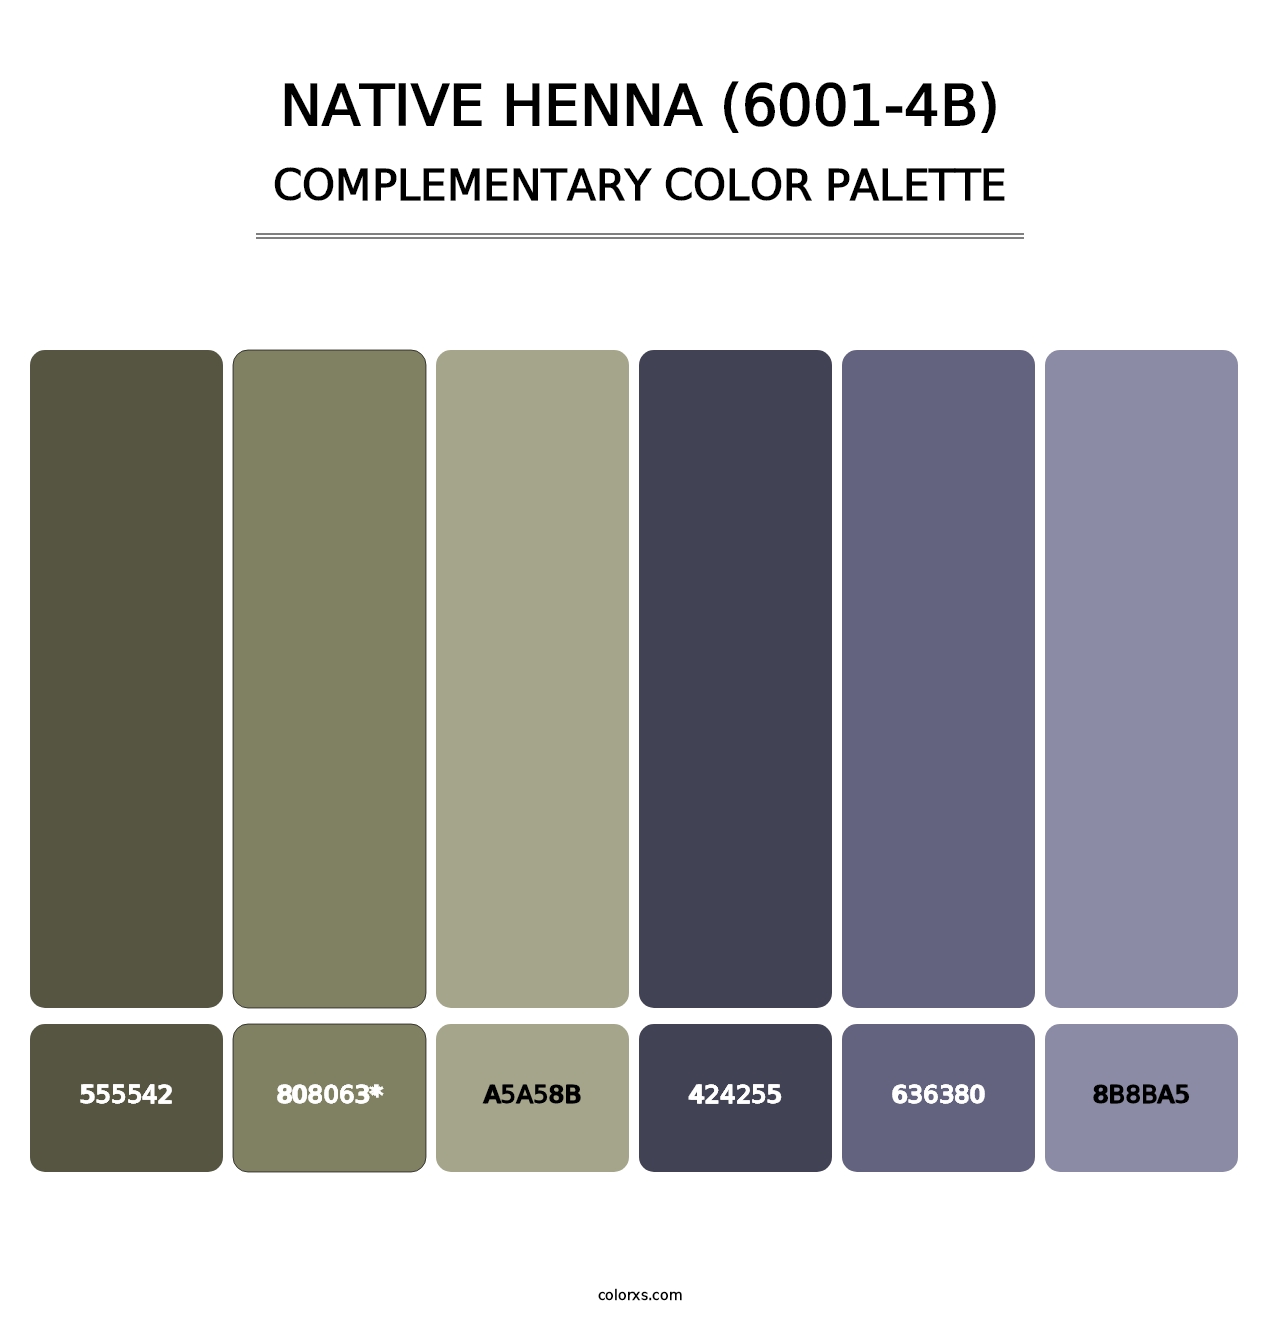 Native Henna (6001-4B) - Complementary Color Palette